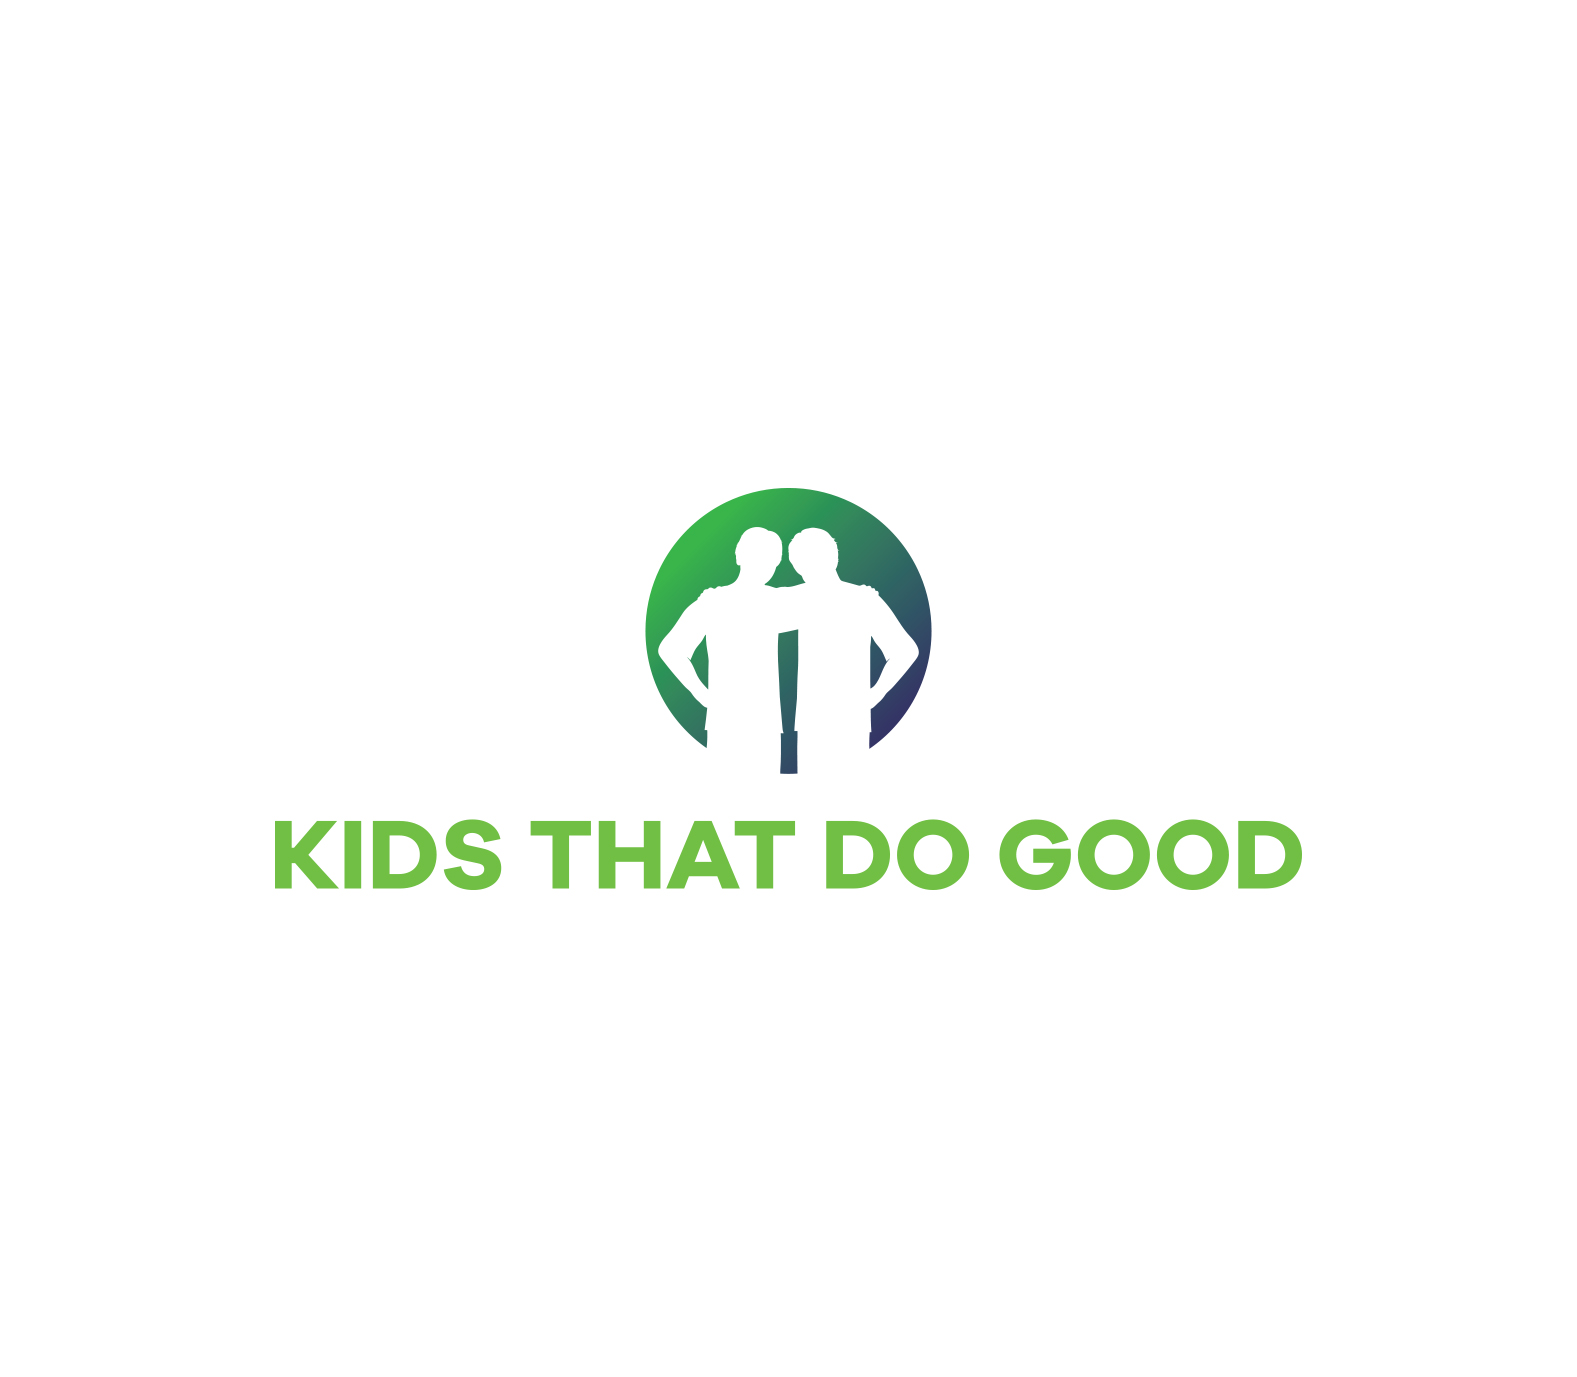 Kids That Do Good Provides Kids of All Ages the Opportunity to Volunteer and Give Back